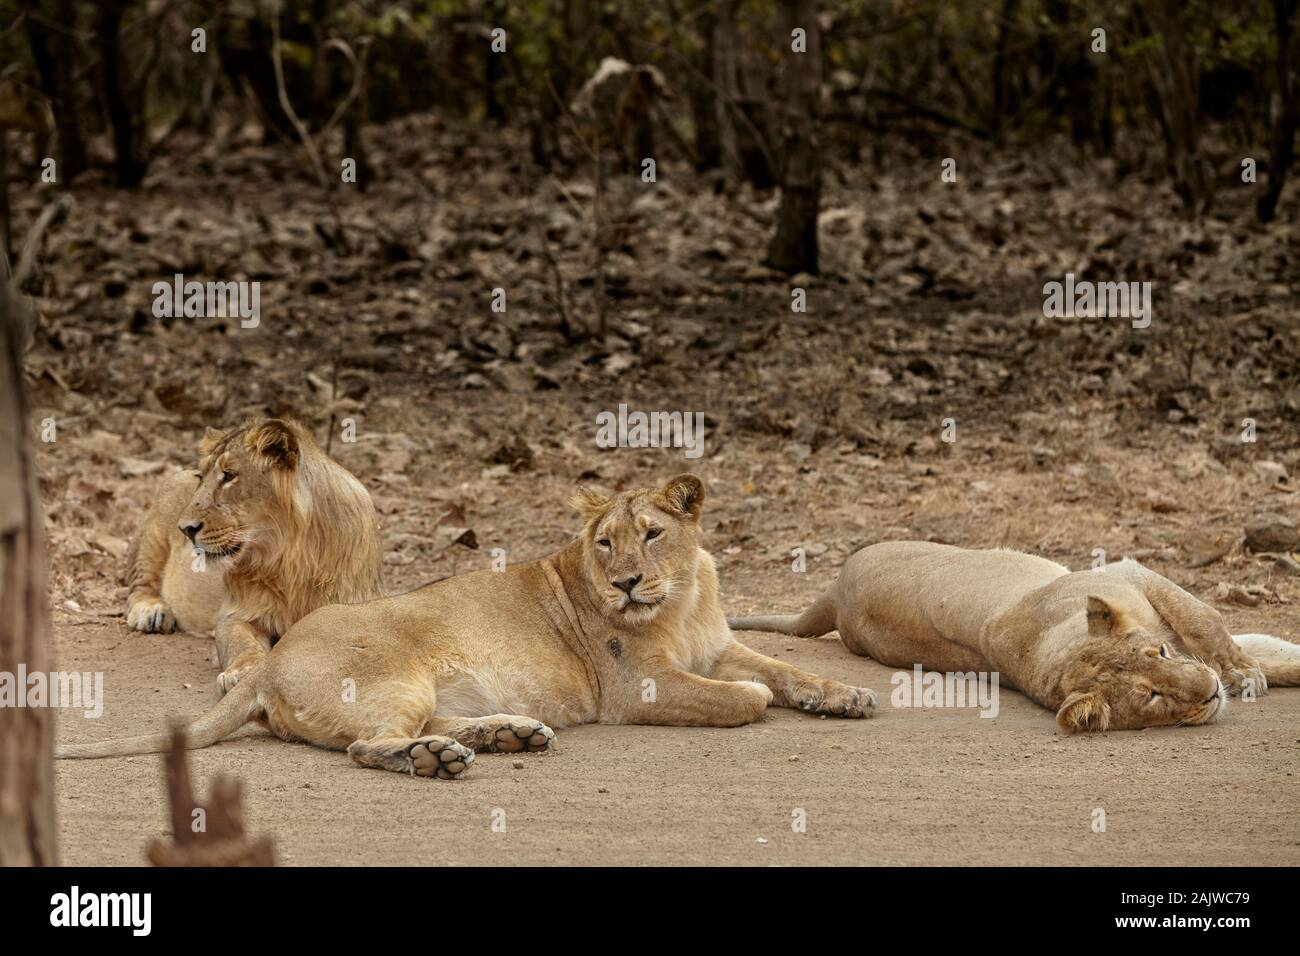 Asiatic lions on the way at gir forest, India. Stock Photo